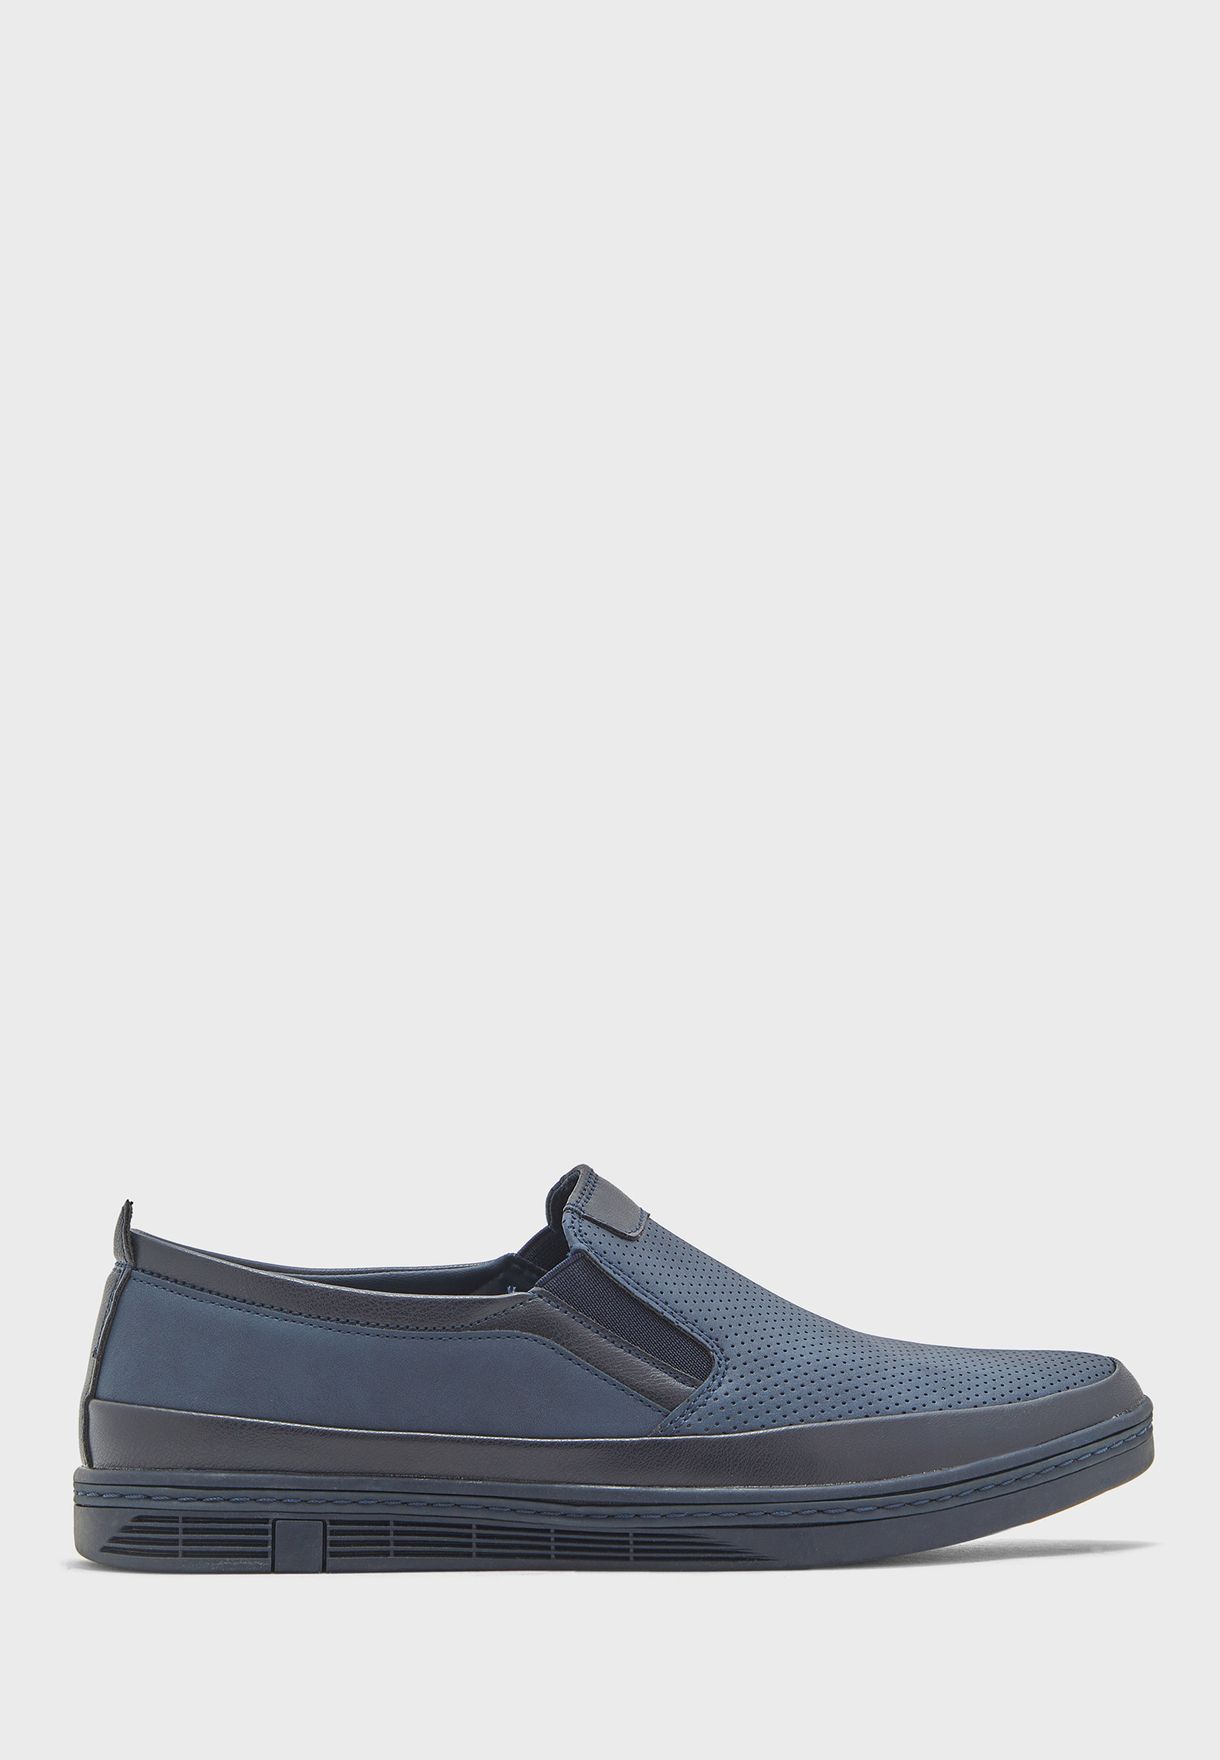 Perforated Casual Slip Ons